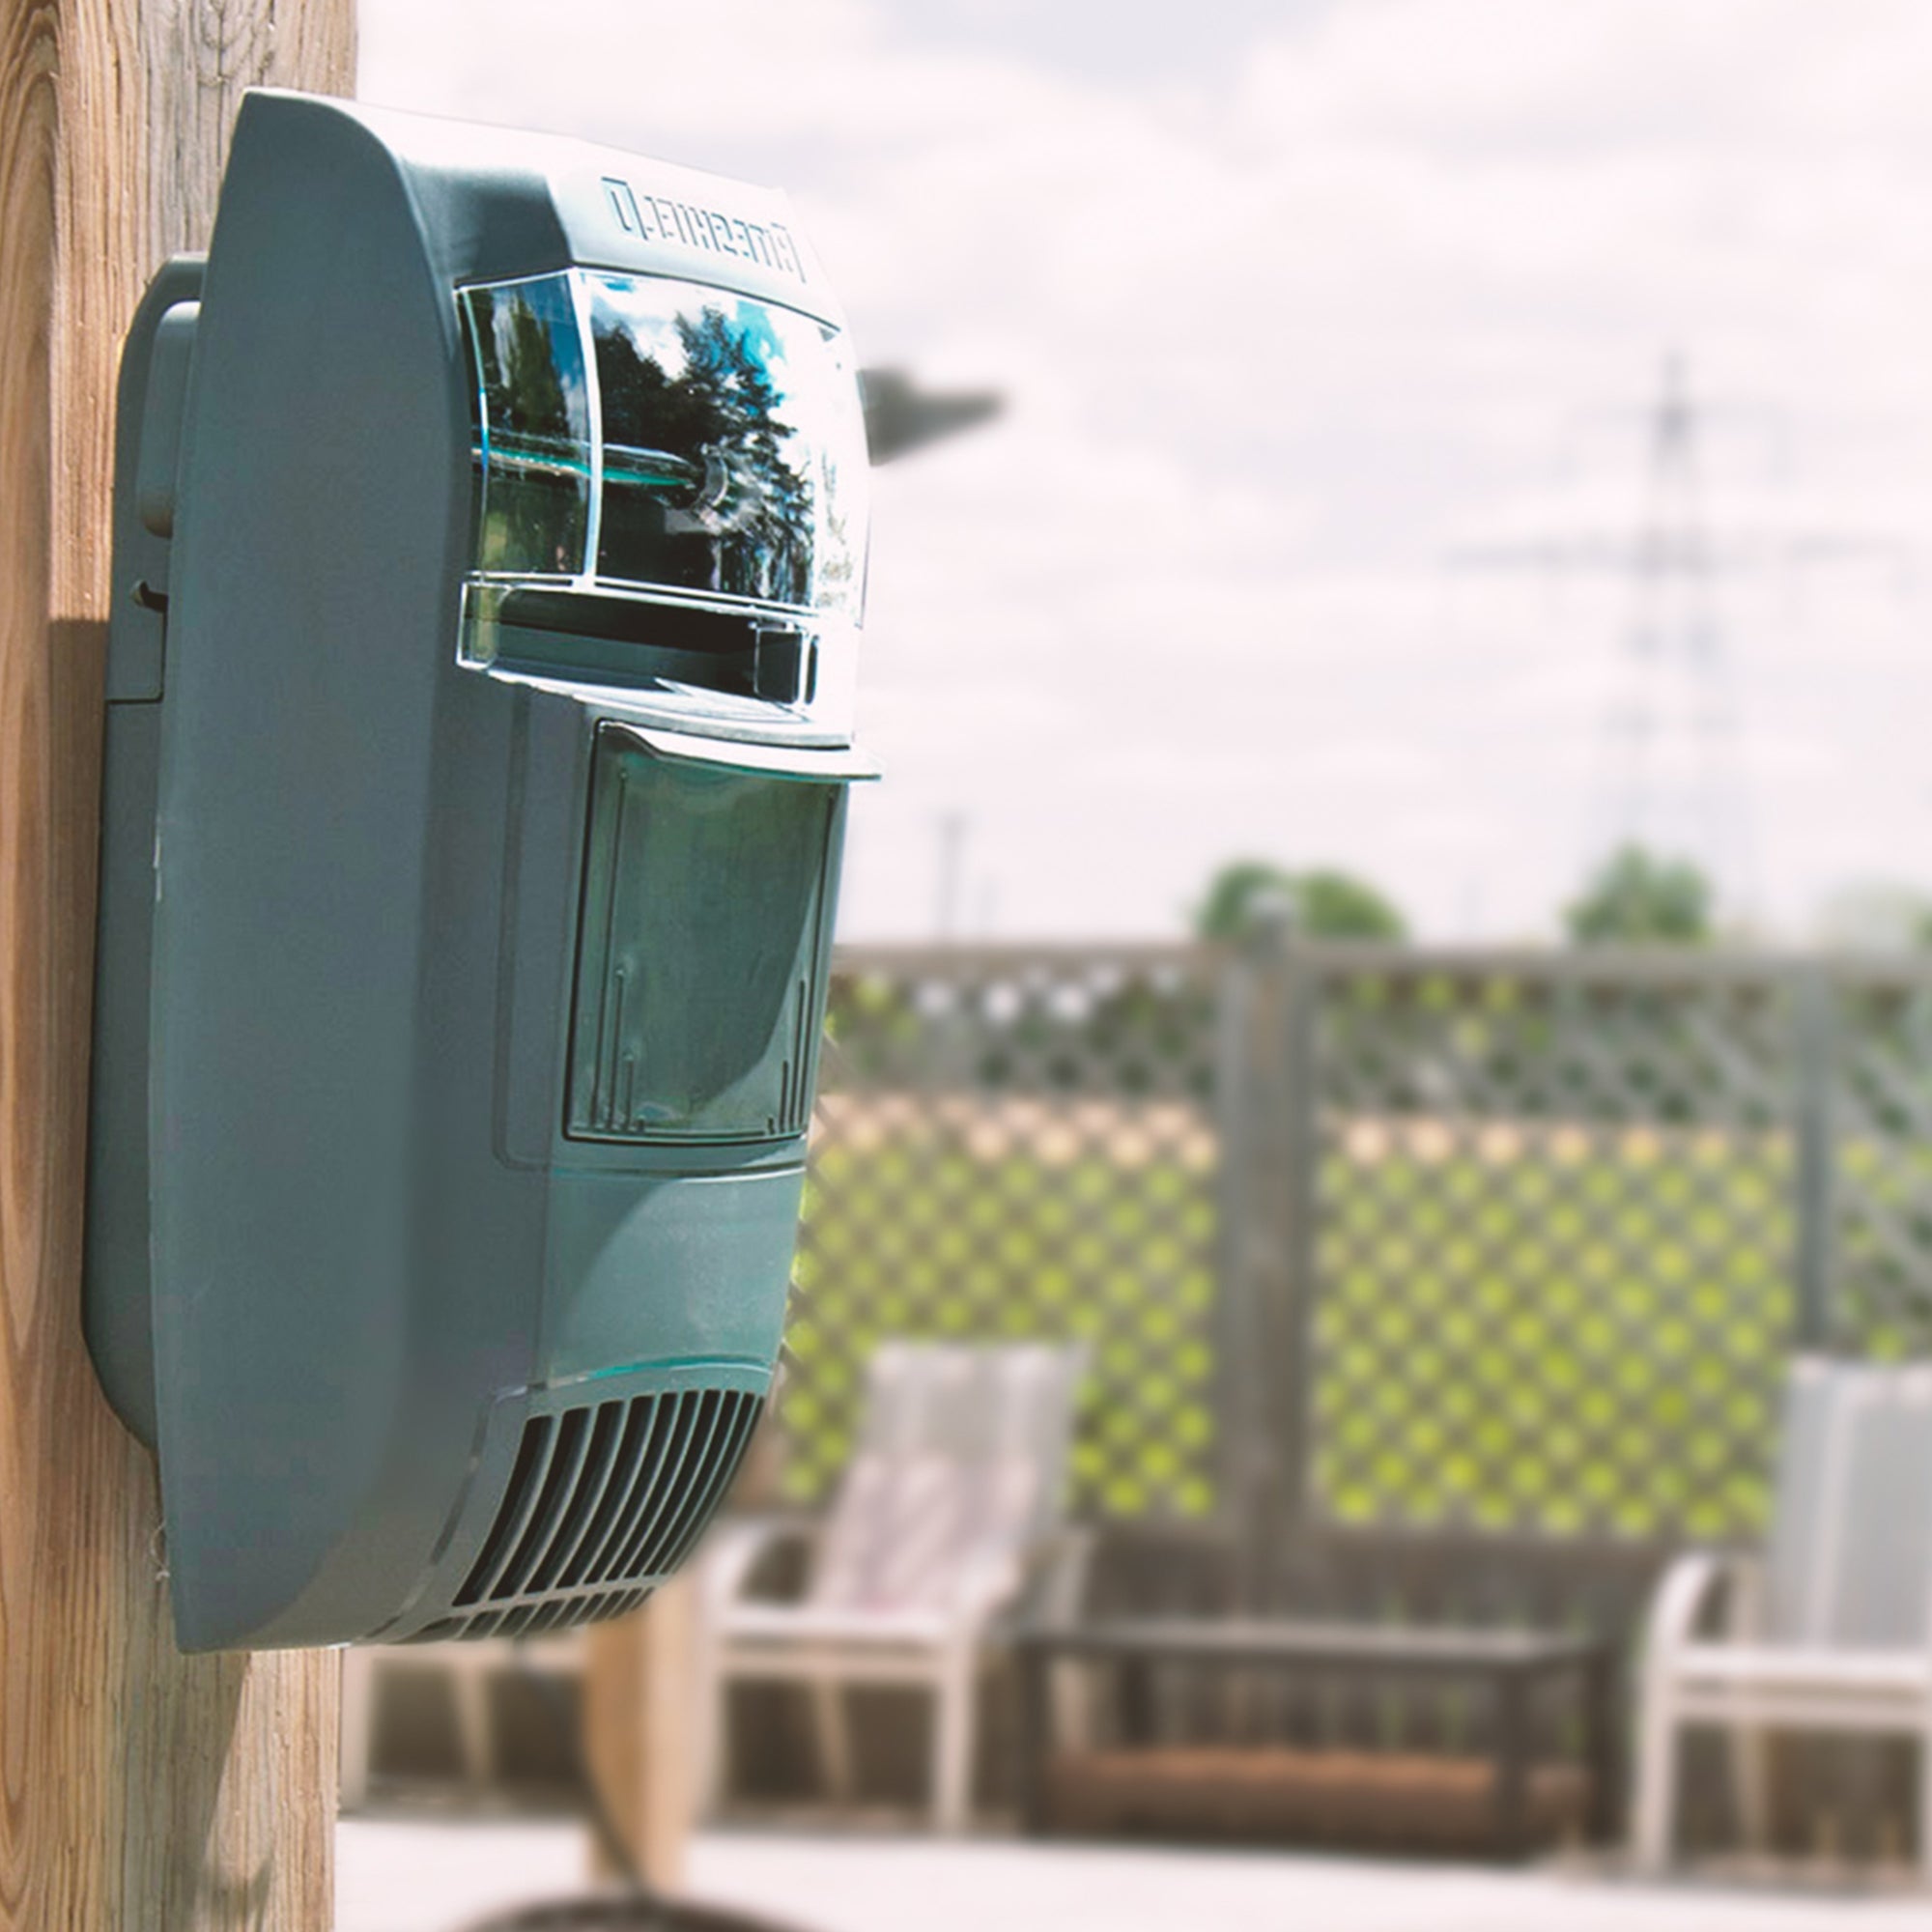 Lifestyle image of Bite Shield wall mount flying insect trap mounted on a wooden post outdoors with wooden deck and deck chairs in the background